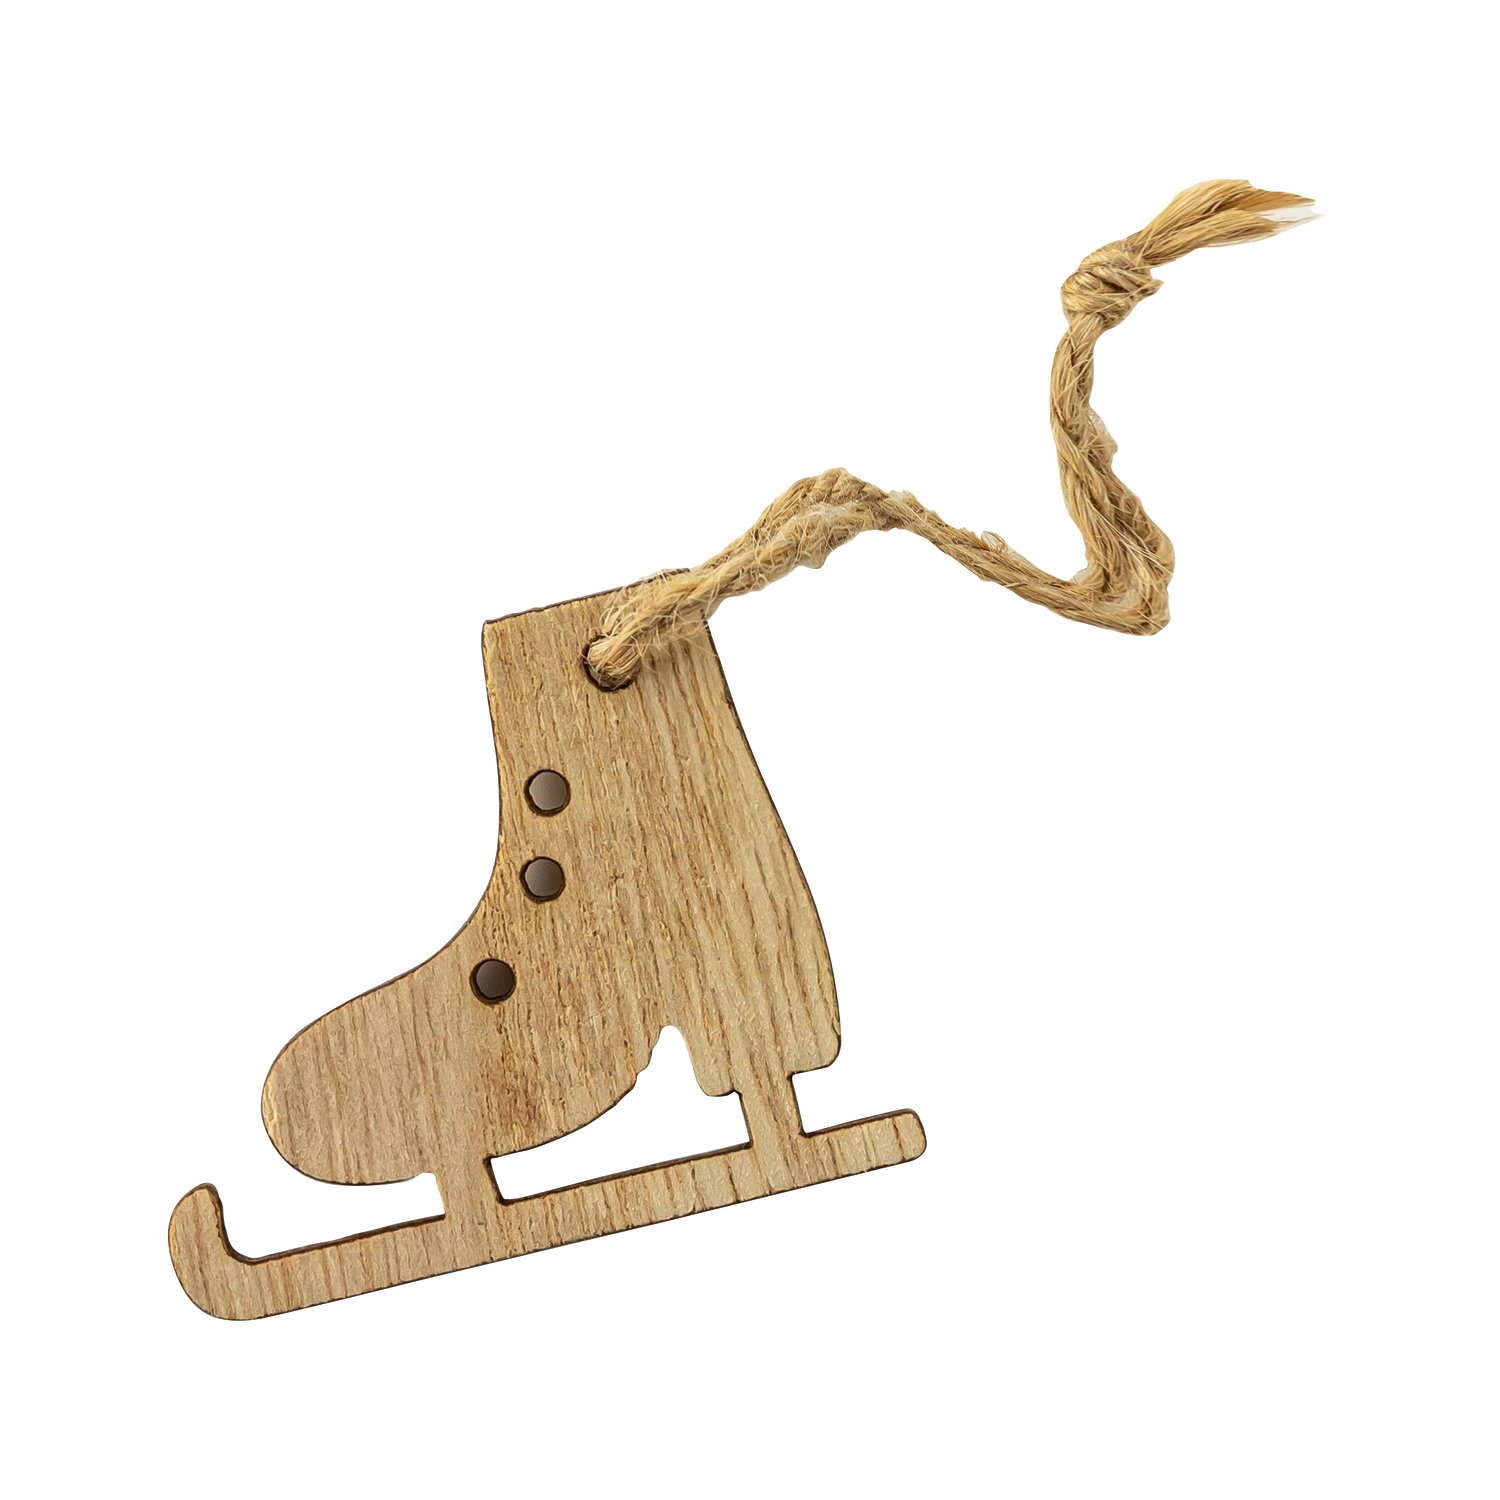 Wooden skate hanger with rope loop 4 x 5cm - 24xpcs